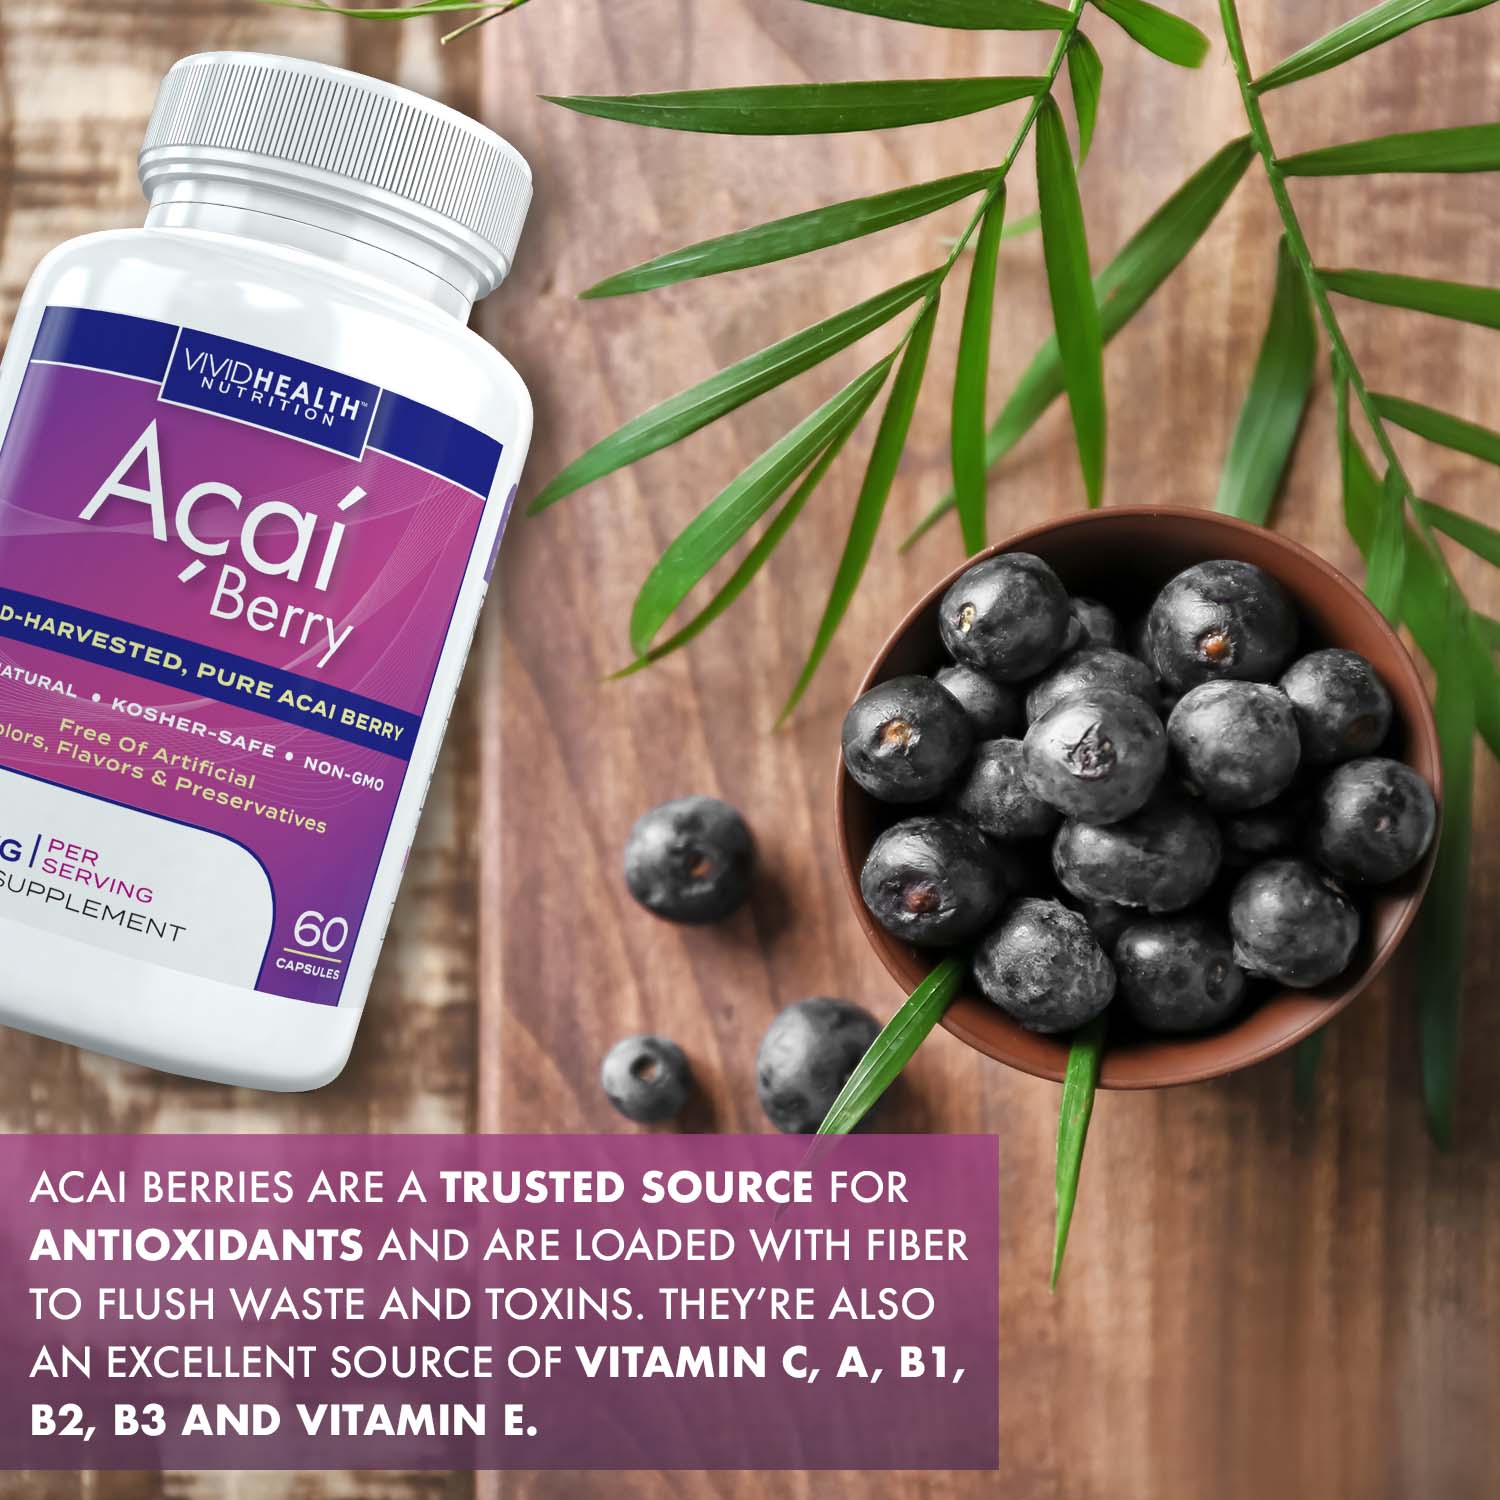 All Natural Acai Berry Supplement | Maximum Strength Vitamin to Boost Metabolism | Acai Berry Cleanse for Detoxification & Weight Loss, 60 capsules - image 5 of 8